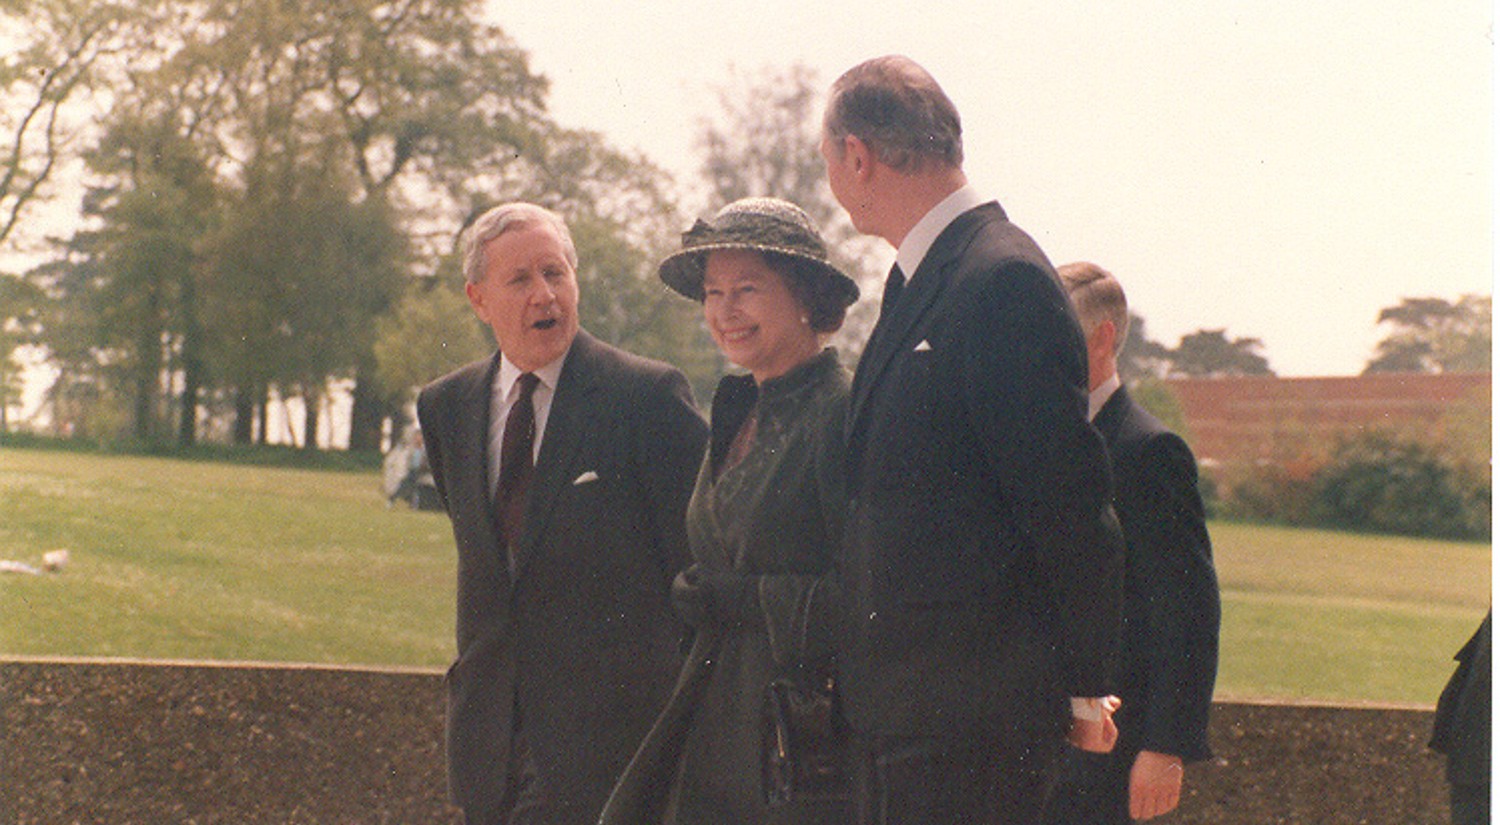 Her Majesty the Queen visits the Colchester Campus in 1985  Credit: Michael Crosby